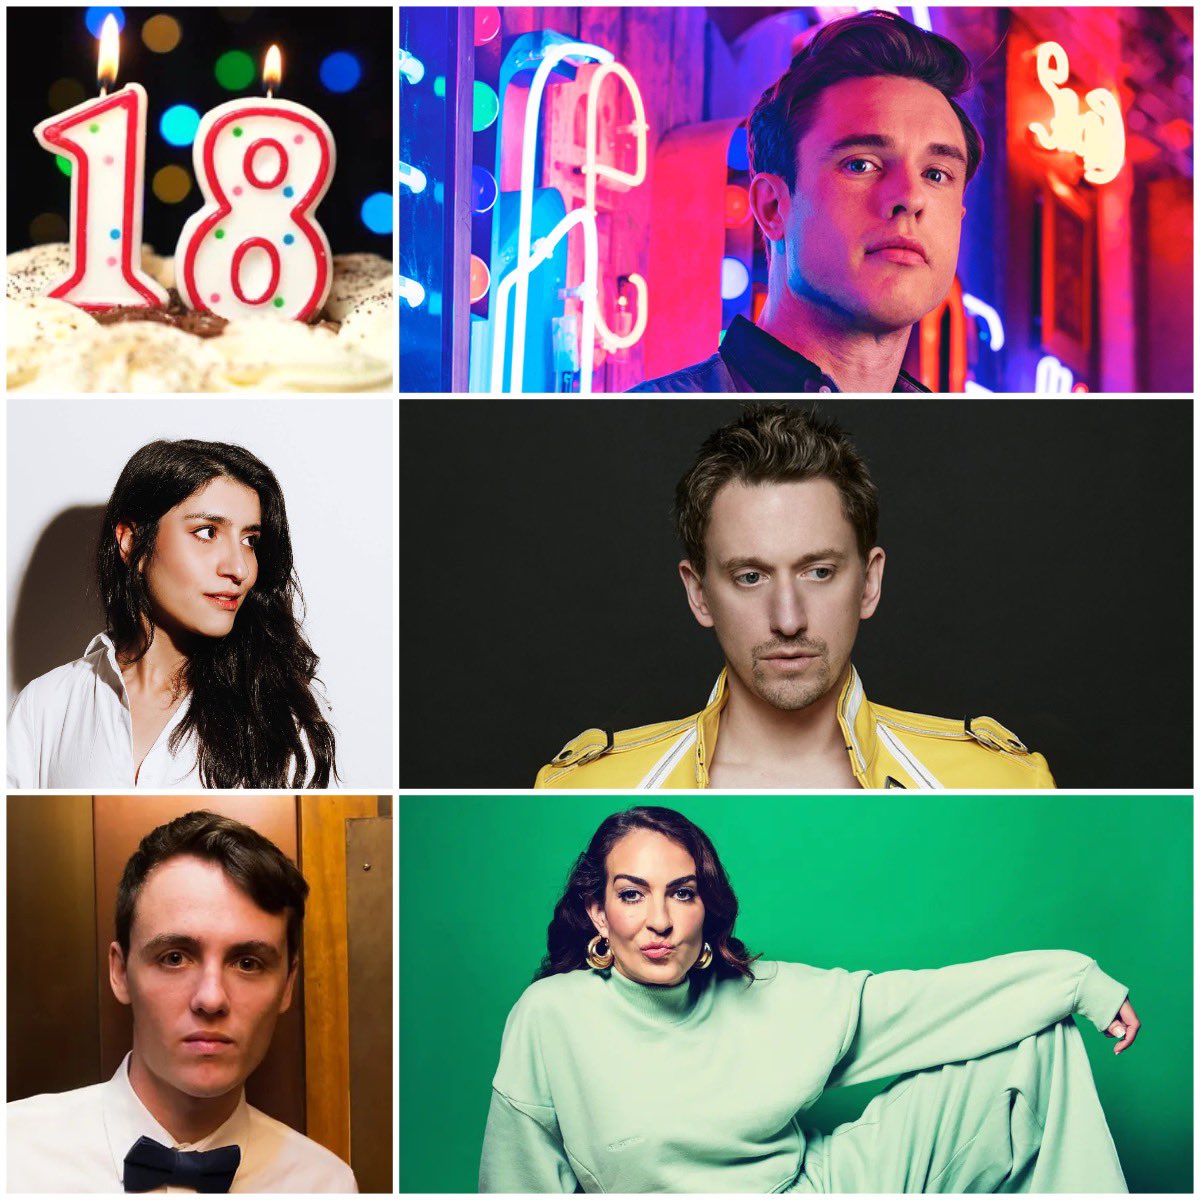 Sunday Specials Big Birthday Bash is this Sunday!💥 See us turn 18 with this bunch👇 🎂 @EdGambleComedy 🎂 @nomadicrevery 🎂 @abcelya 🎂 @esther_manito 🎂 Sam Campbell + Cake* / Obligatory Party Hats** 🍰🥳 * Free ** Provided Long sold-out. See you there ✌️